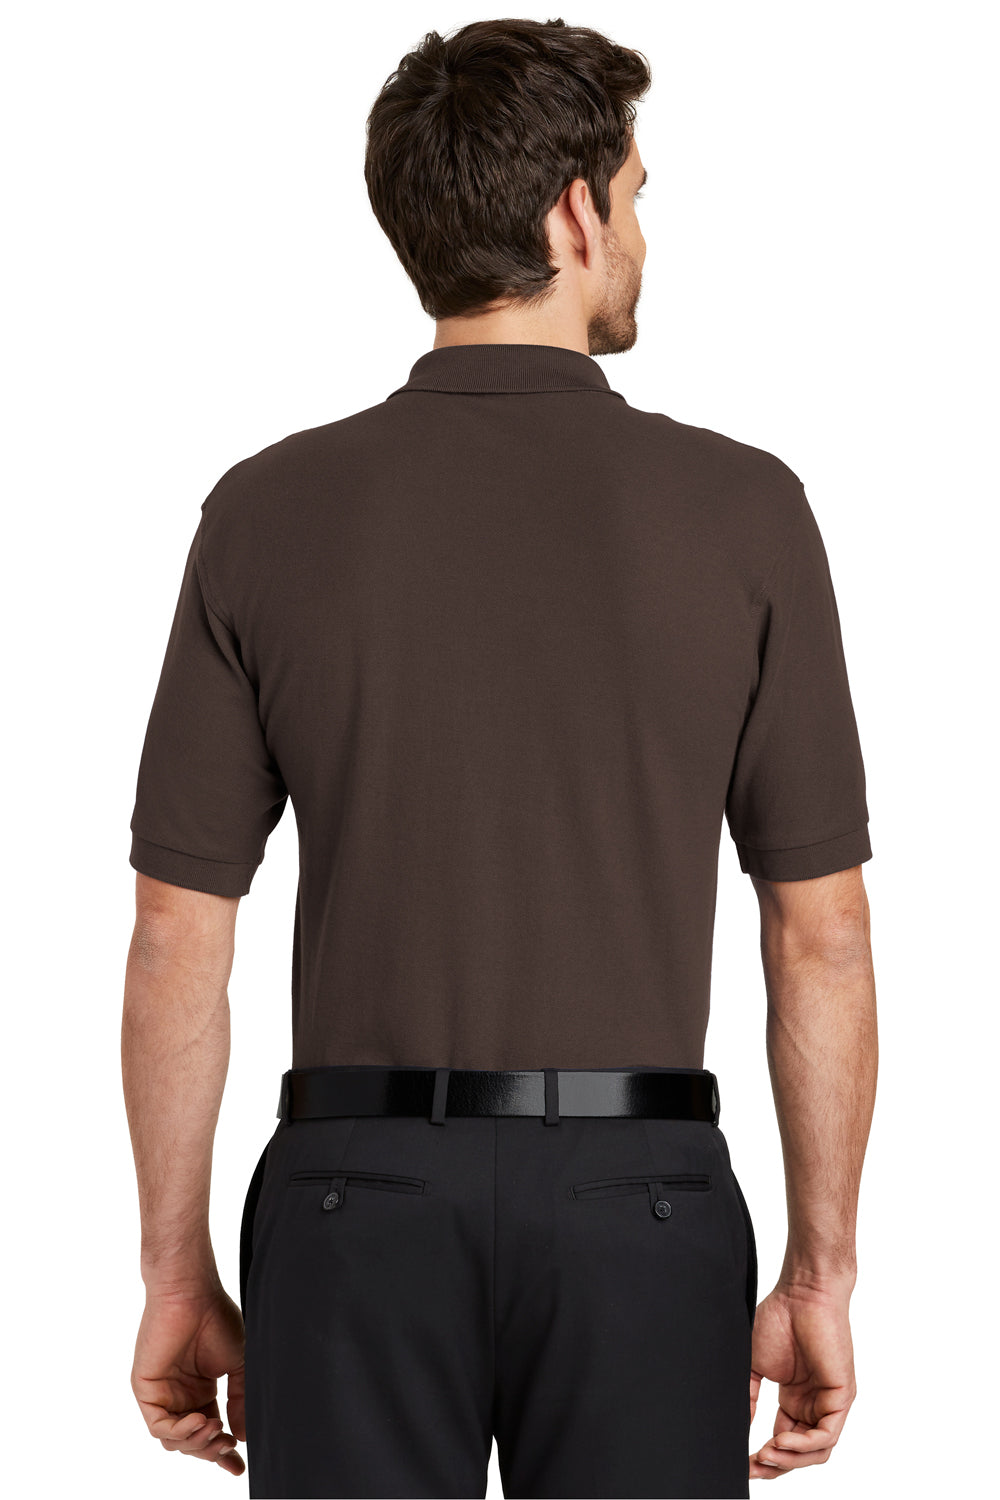 Port Authority K500 Mens Silk Touch Wrinkle Resistant Short Sleeve Polo Shirt Coffee Brown Back